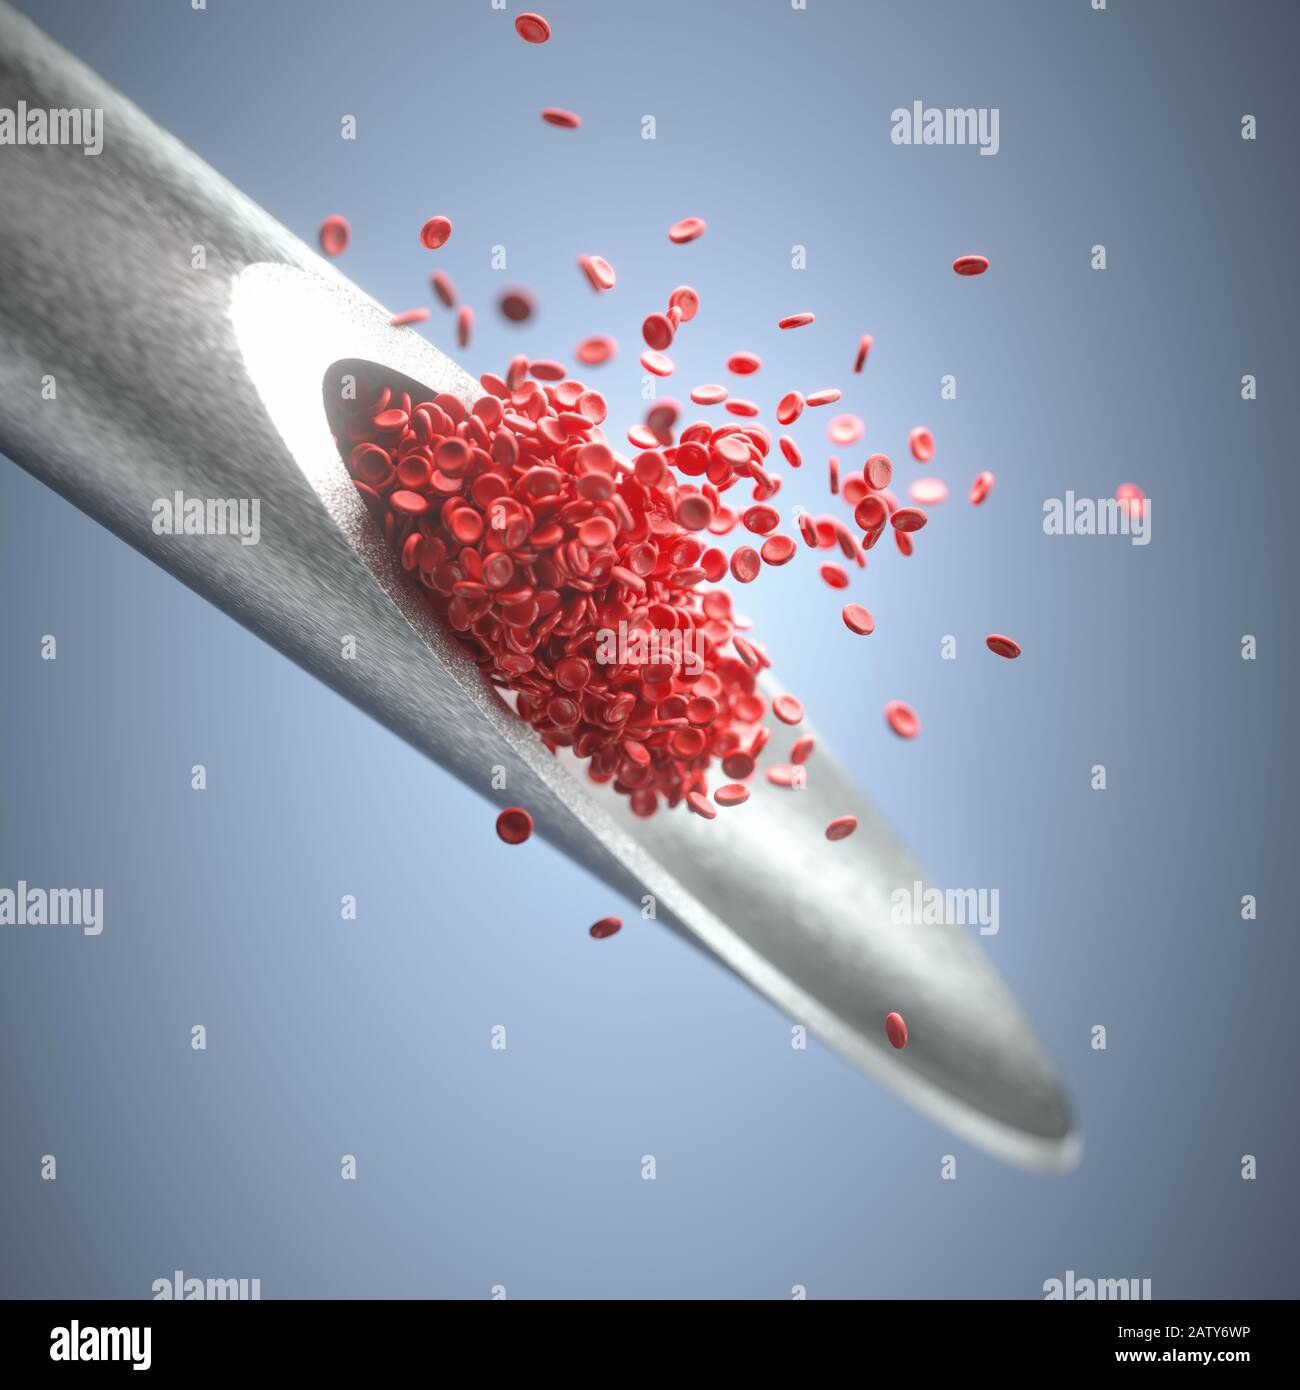 Injection needle with red blood cells protruding from the tip. 3D illustration, concept image of medicine and scientific studies. Stock Photo